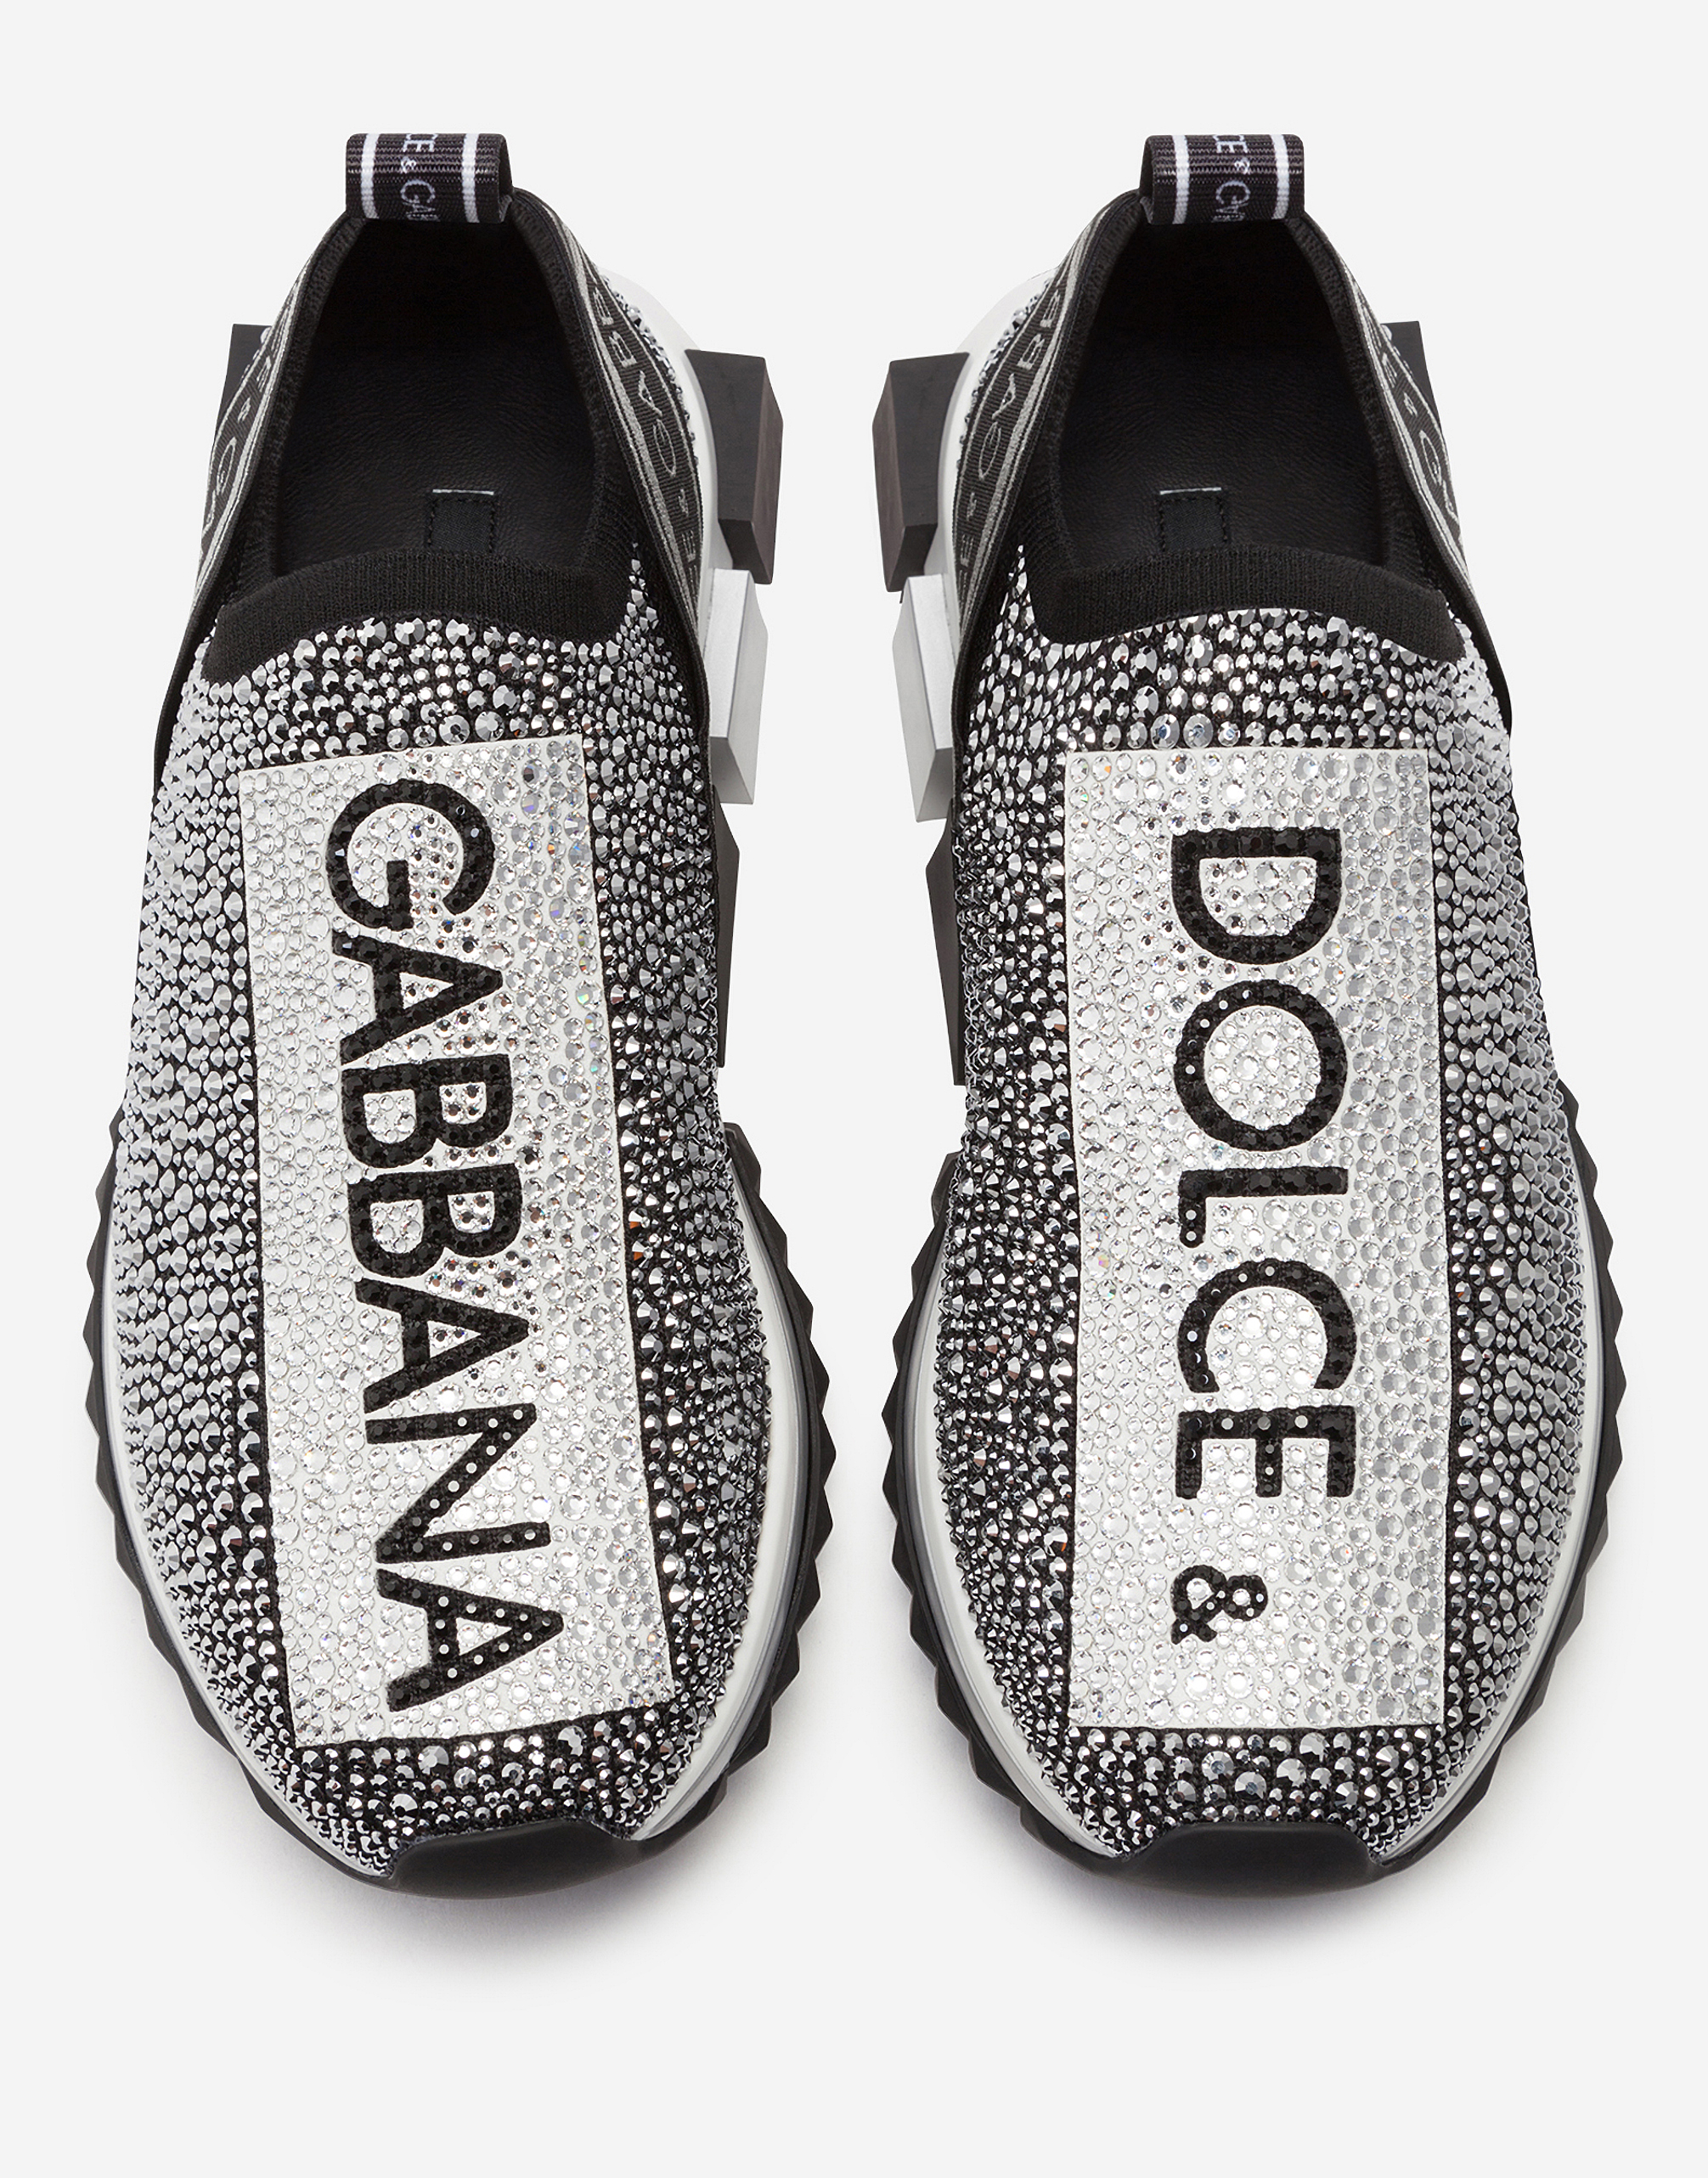 Sanction Purple Ounce Sorrento sneakers with fusible crystals in Grey/Black for Women |  Dolce&Gabbana®